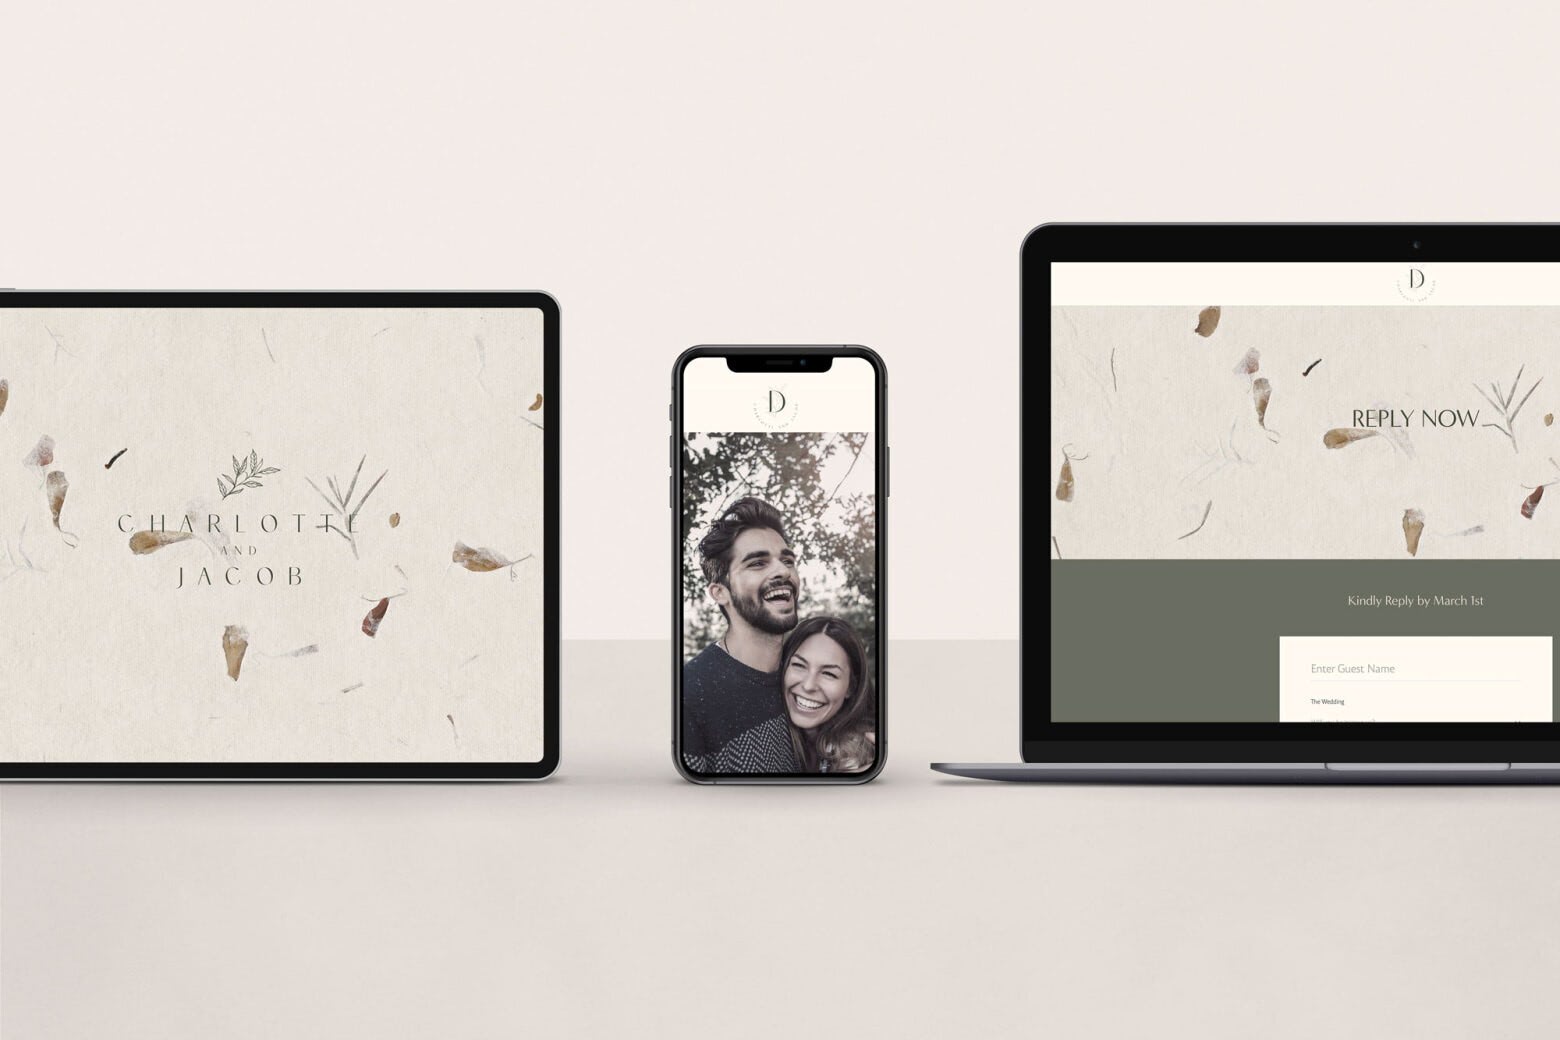 An iPad, iPhone and laptop screen displaying a botanical inspired wedding website and online RSVP form